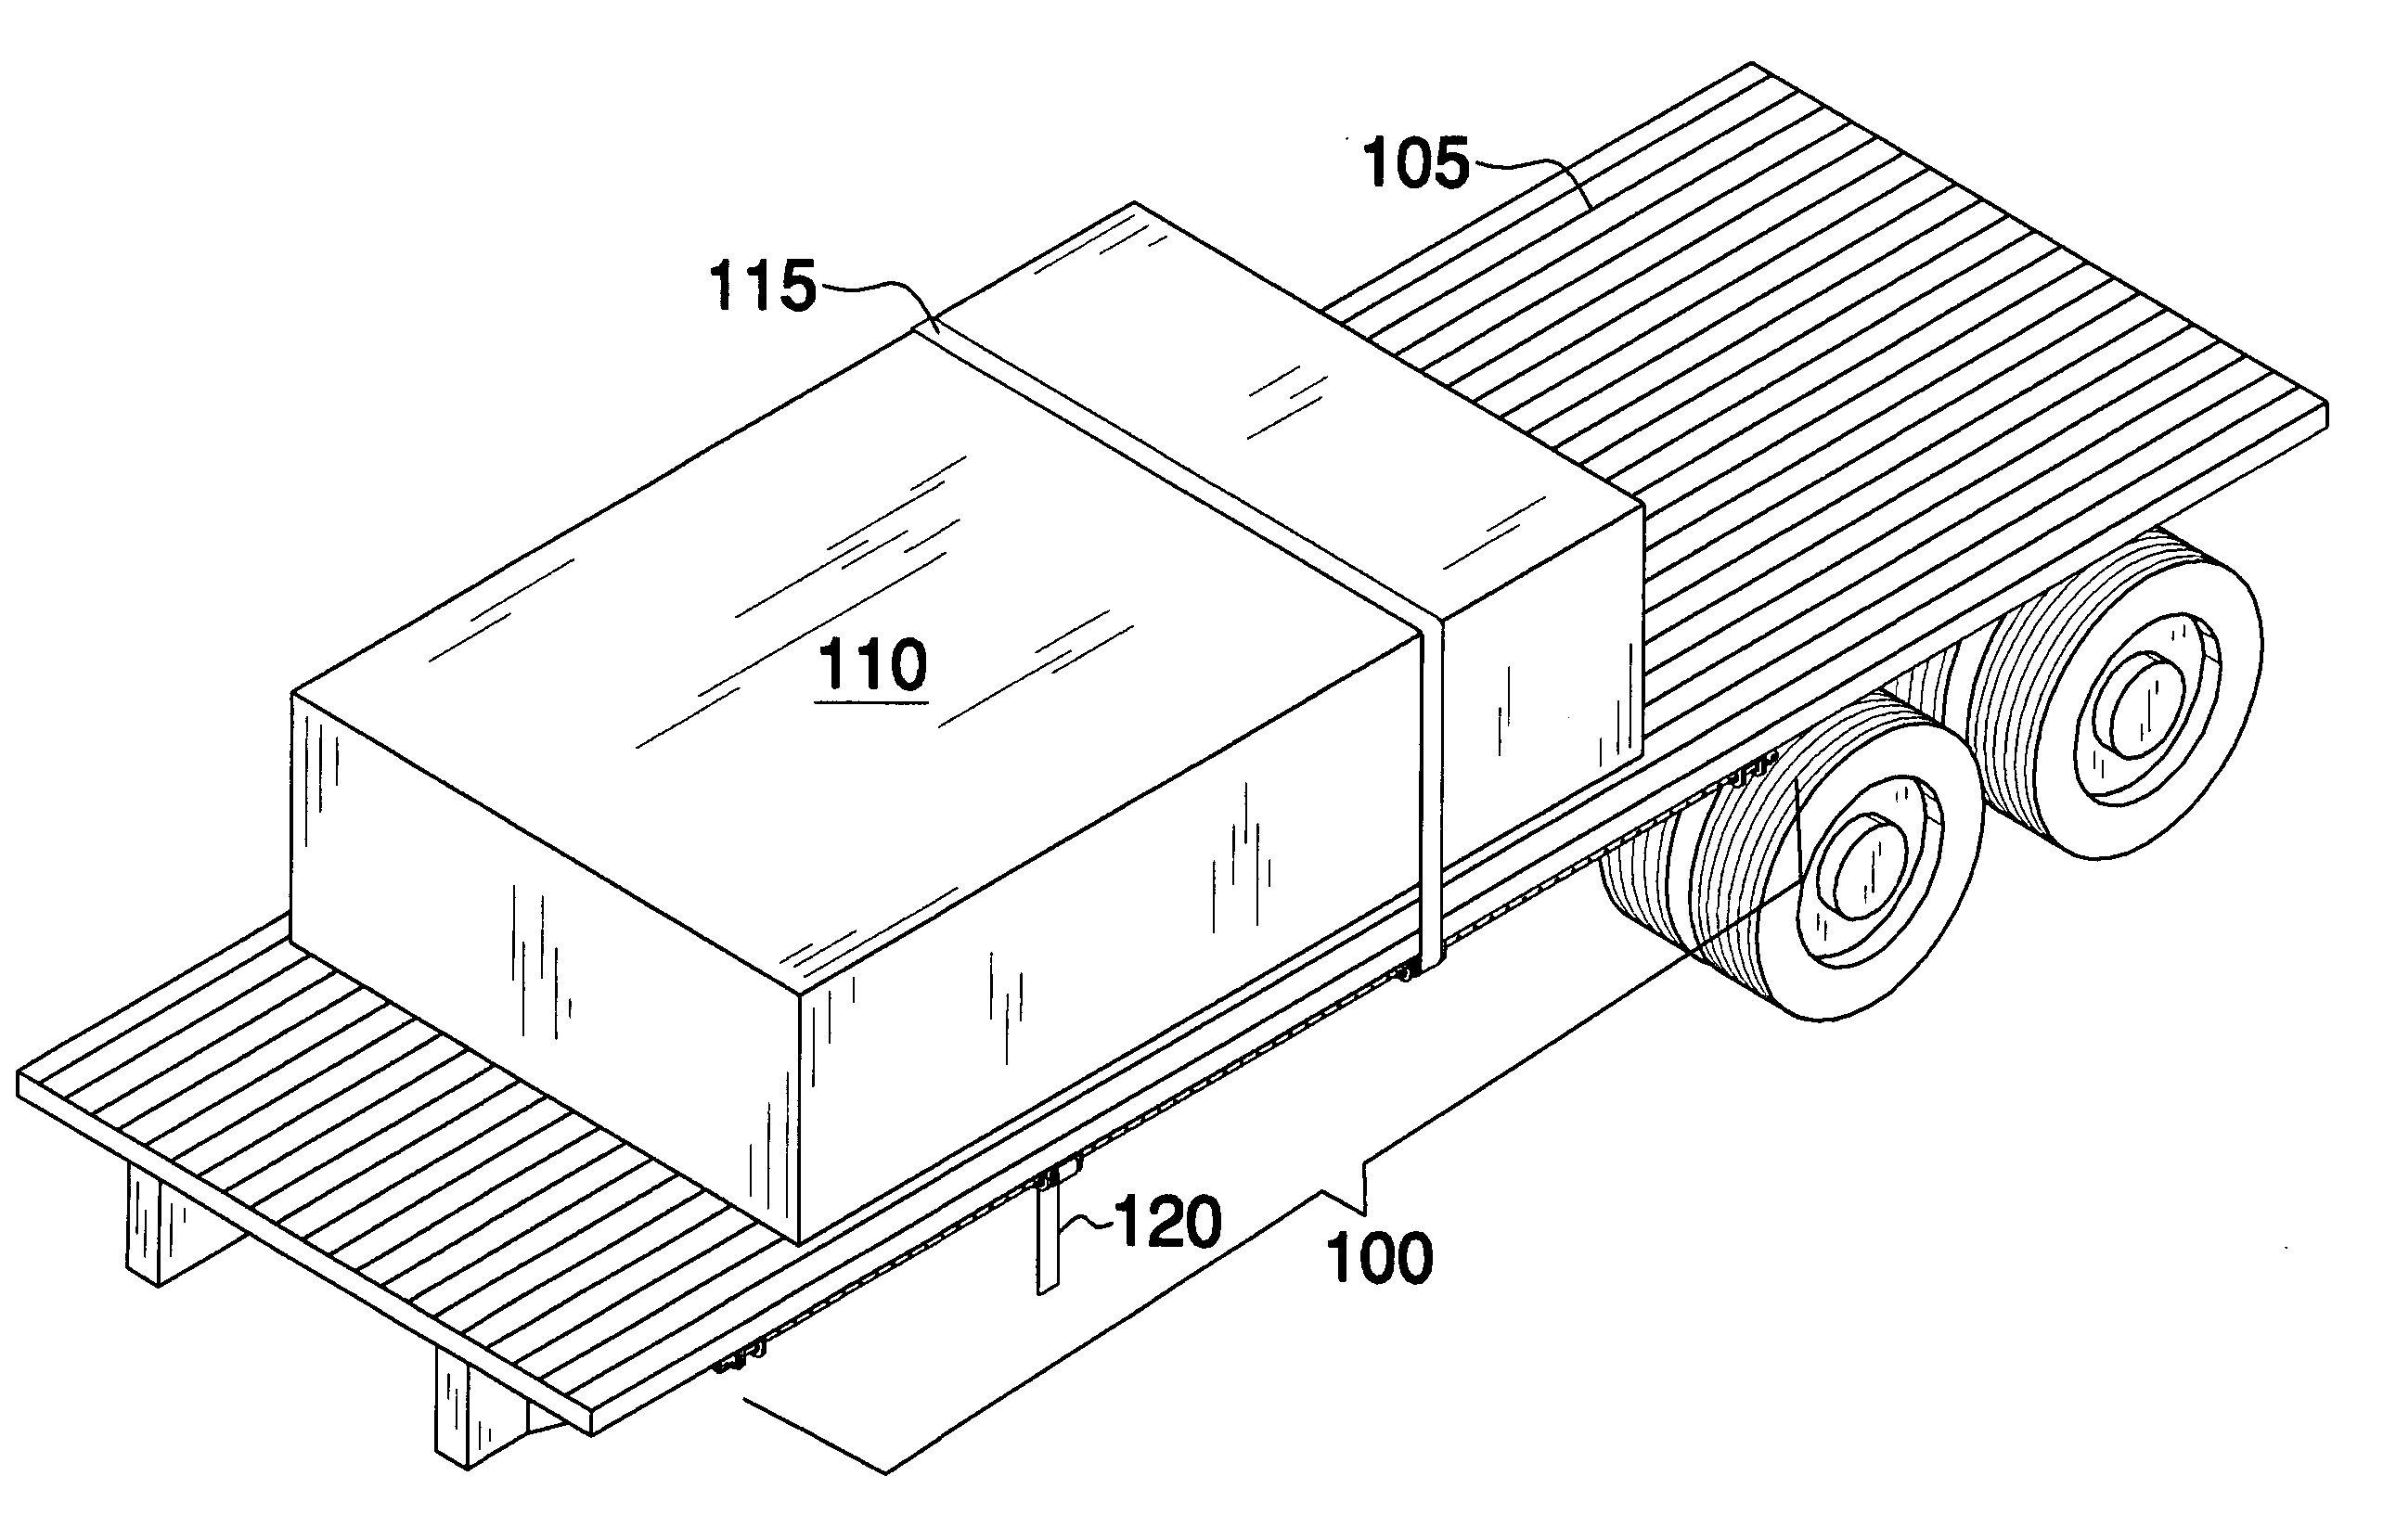 Automated system for securing a load to a flatbed truck